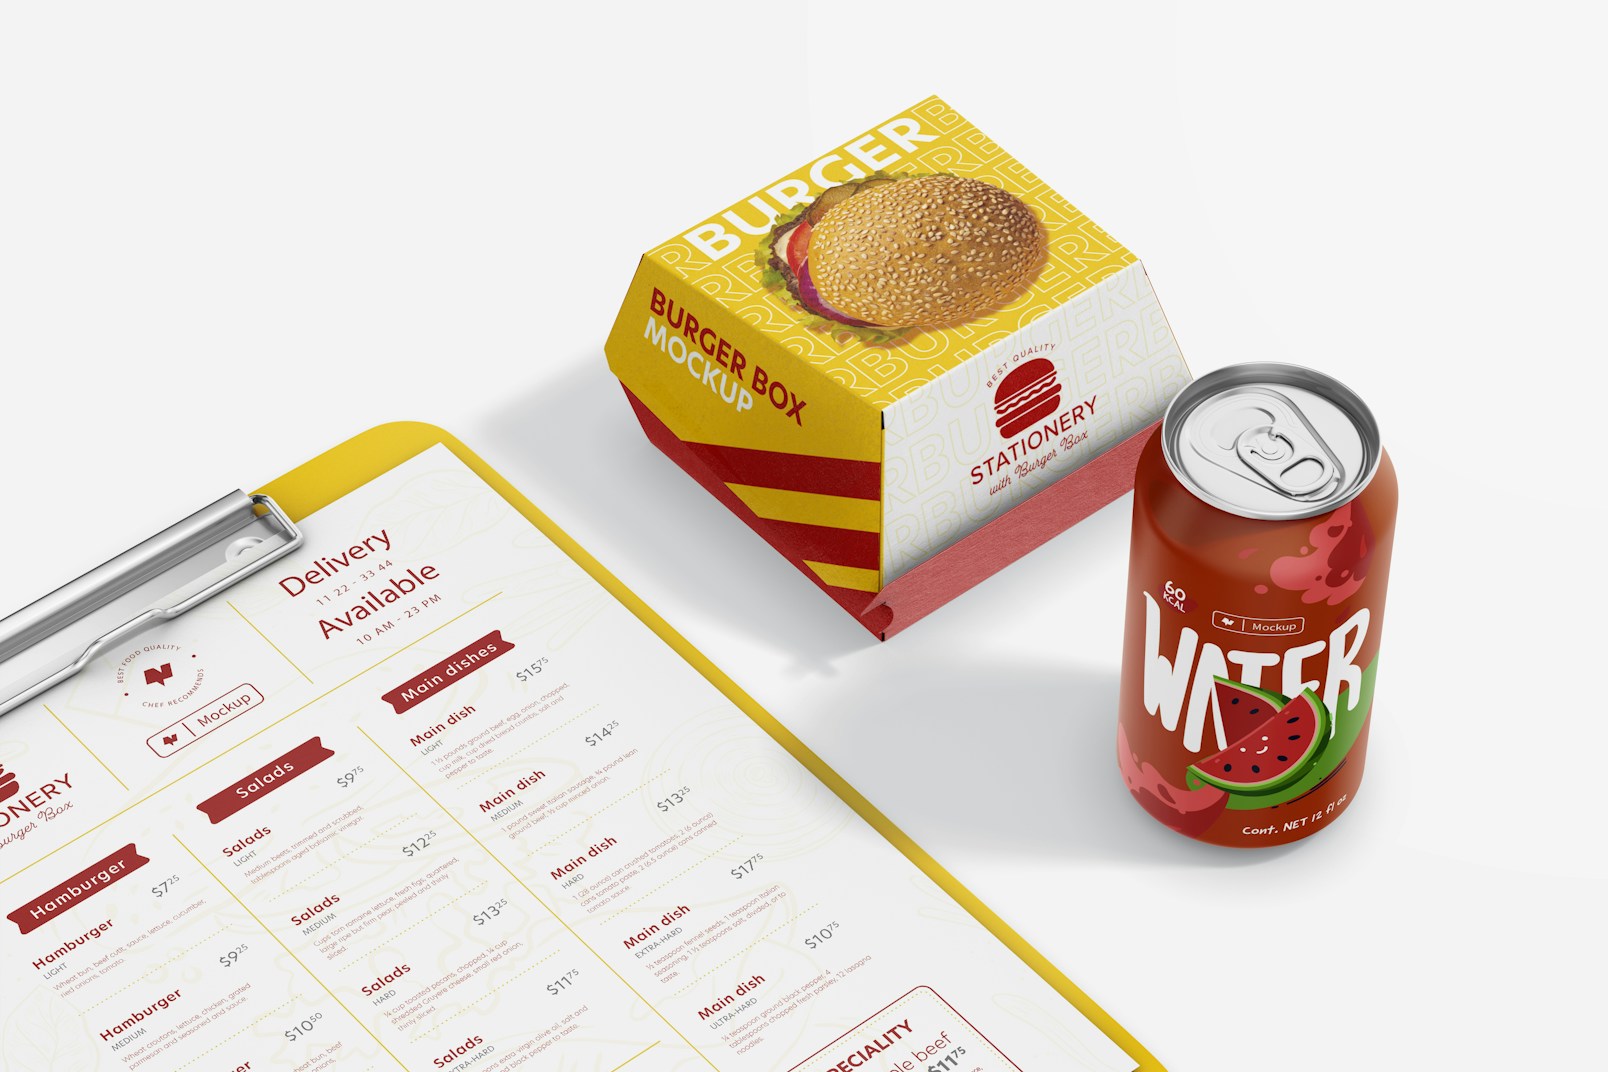 Stationery with Burger Box Mockup, Perspective